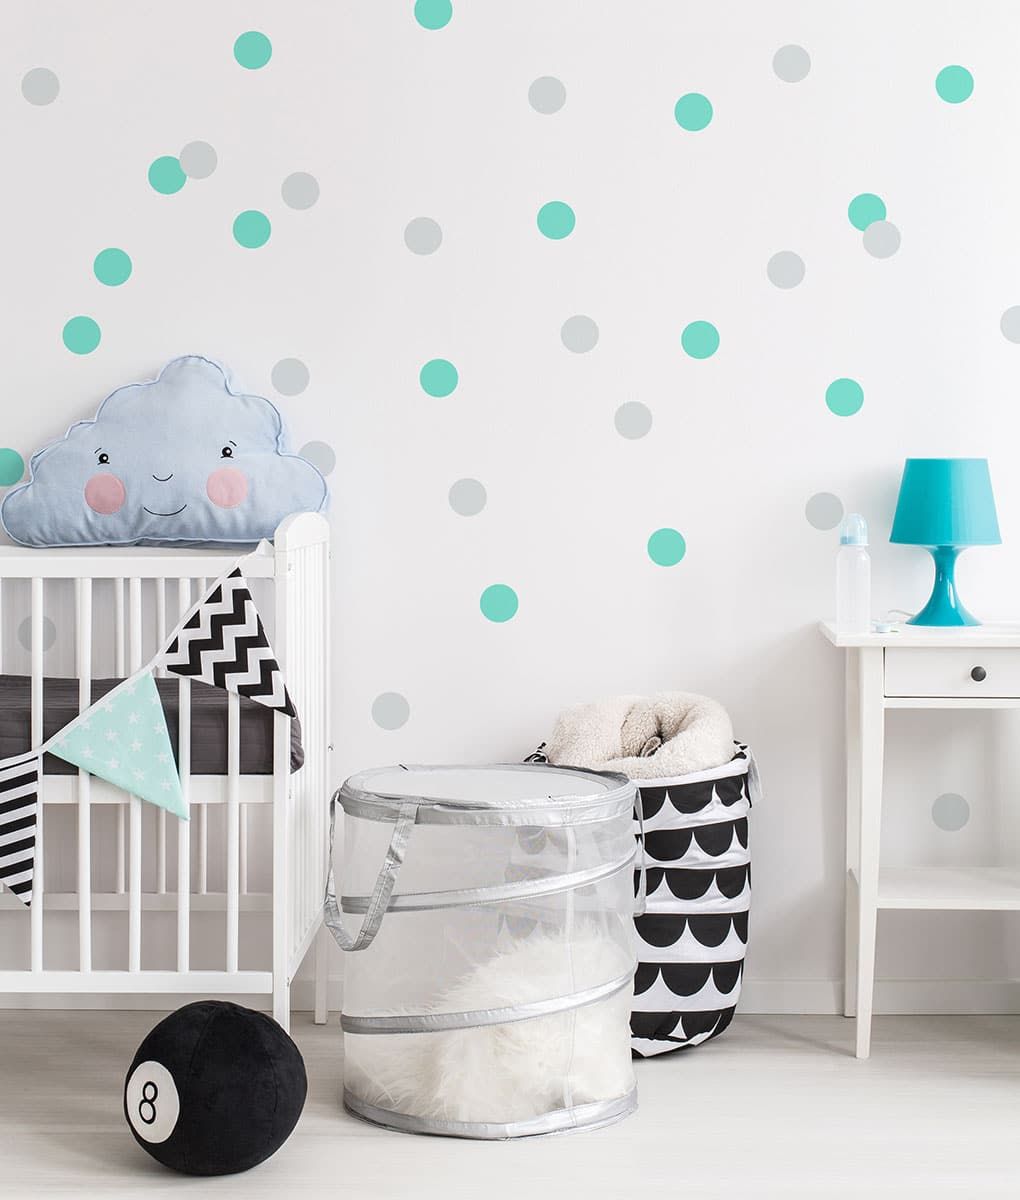 Polka Dot Wall Decals & Stickers | Removable Nursery Decor | 41 Orchard Regarding Open Dotswall Art (View 6 of 15)